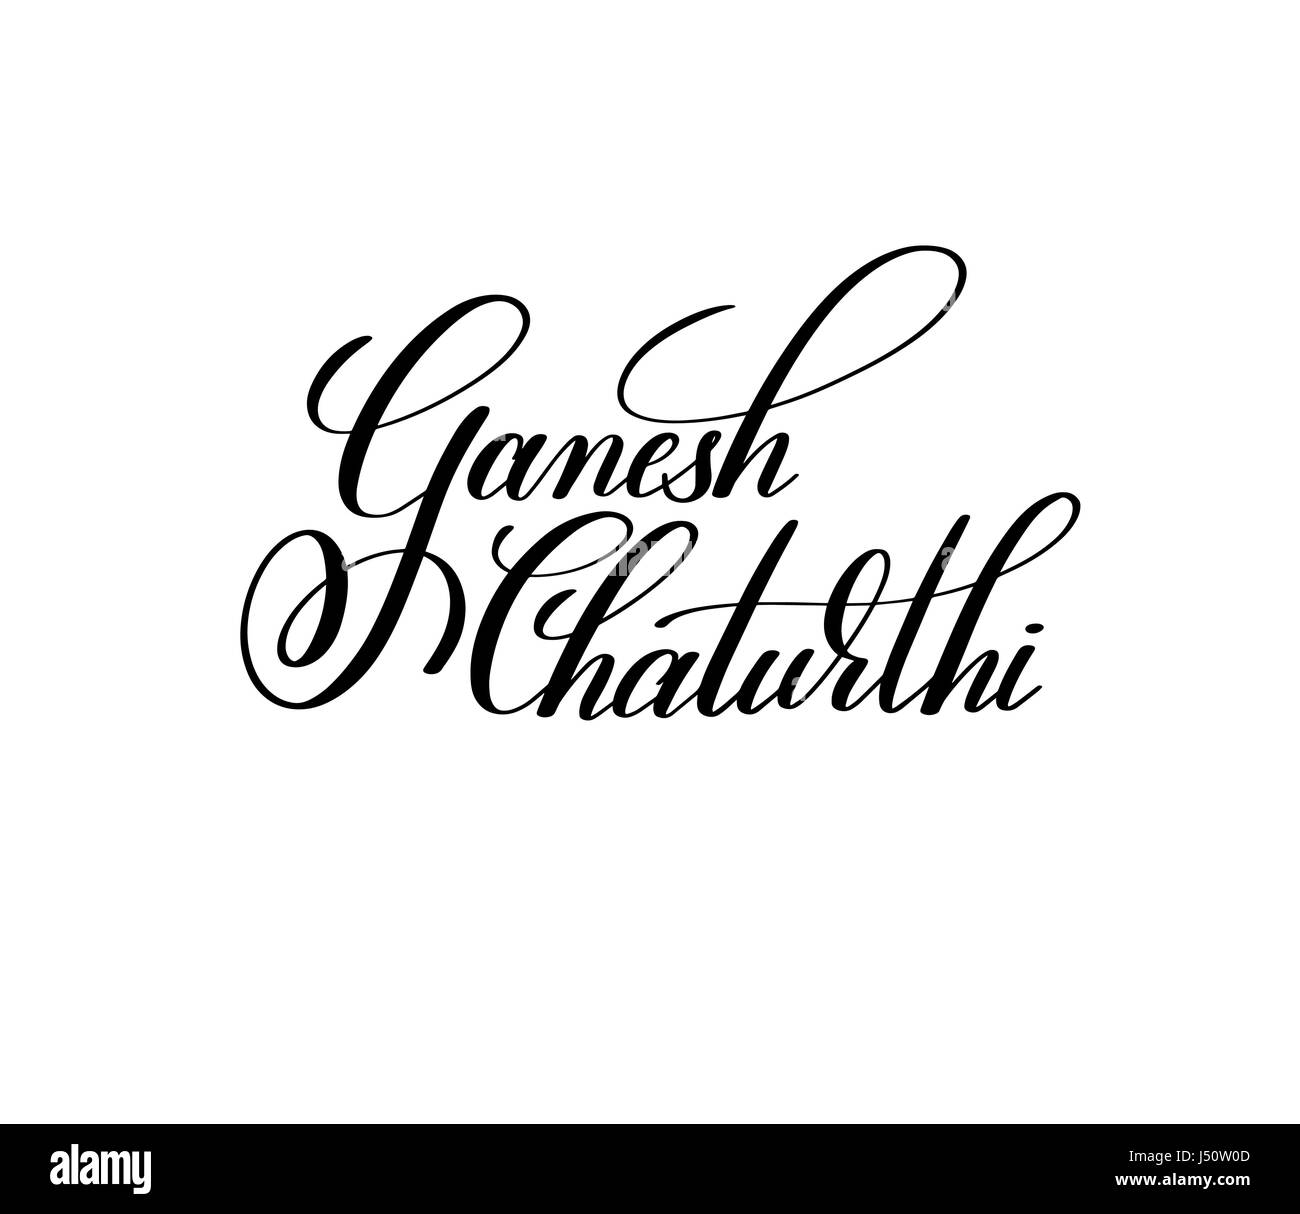 ganesh chaturthi black and white hand lettering Stock Vector